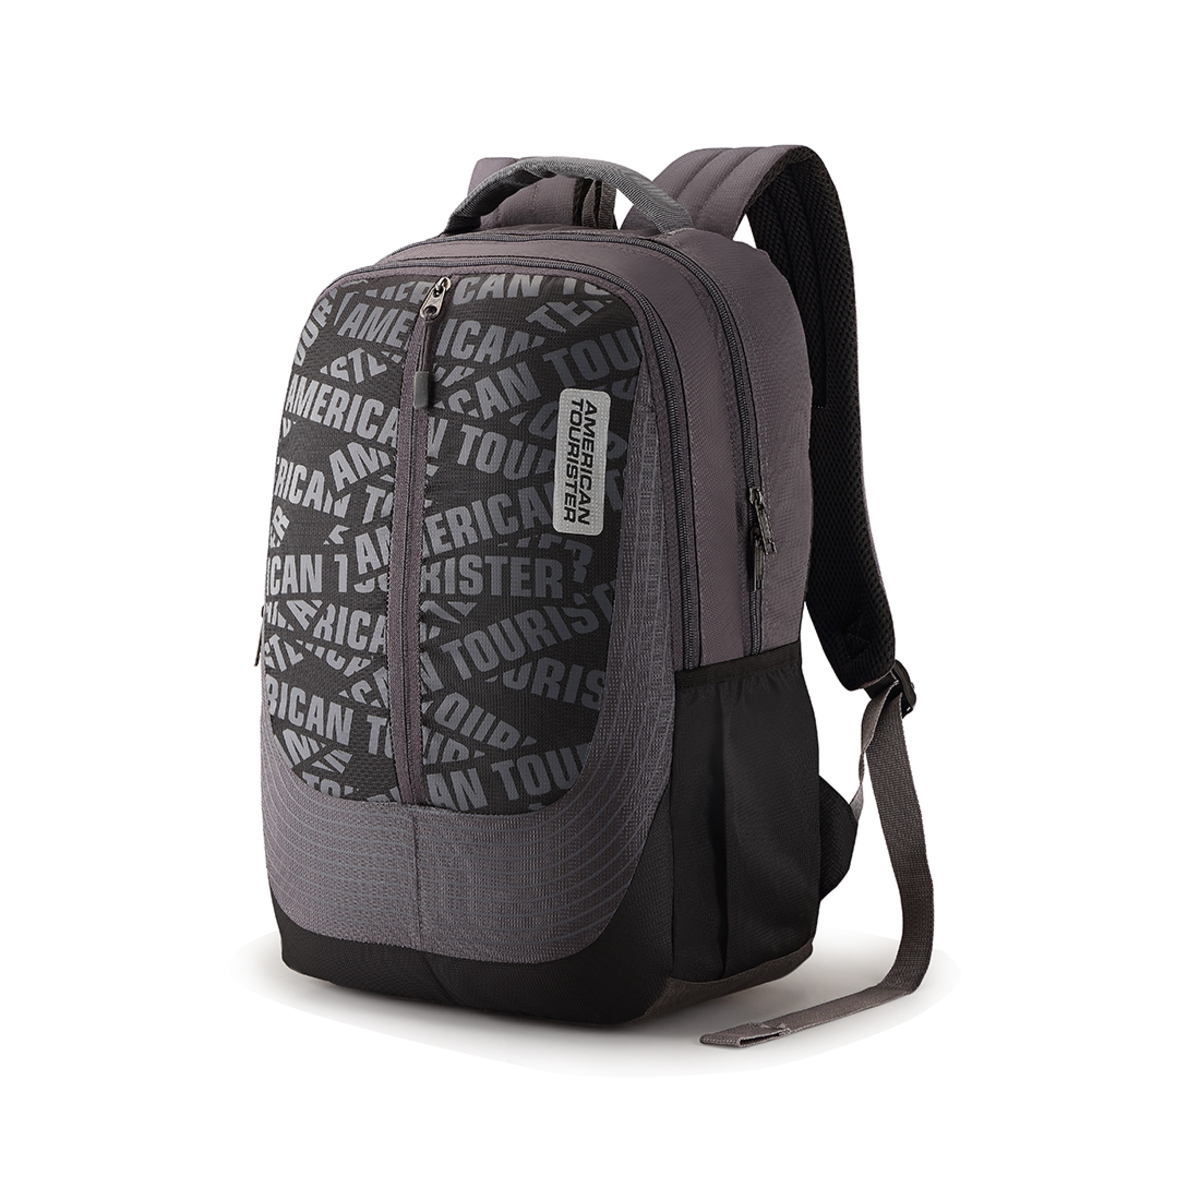 American Tourister Back Pack Twing 03 Grey